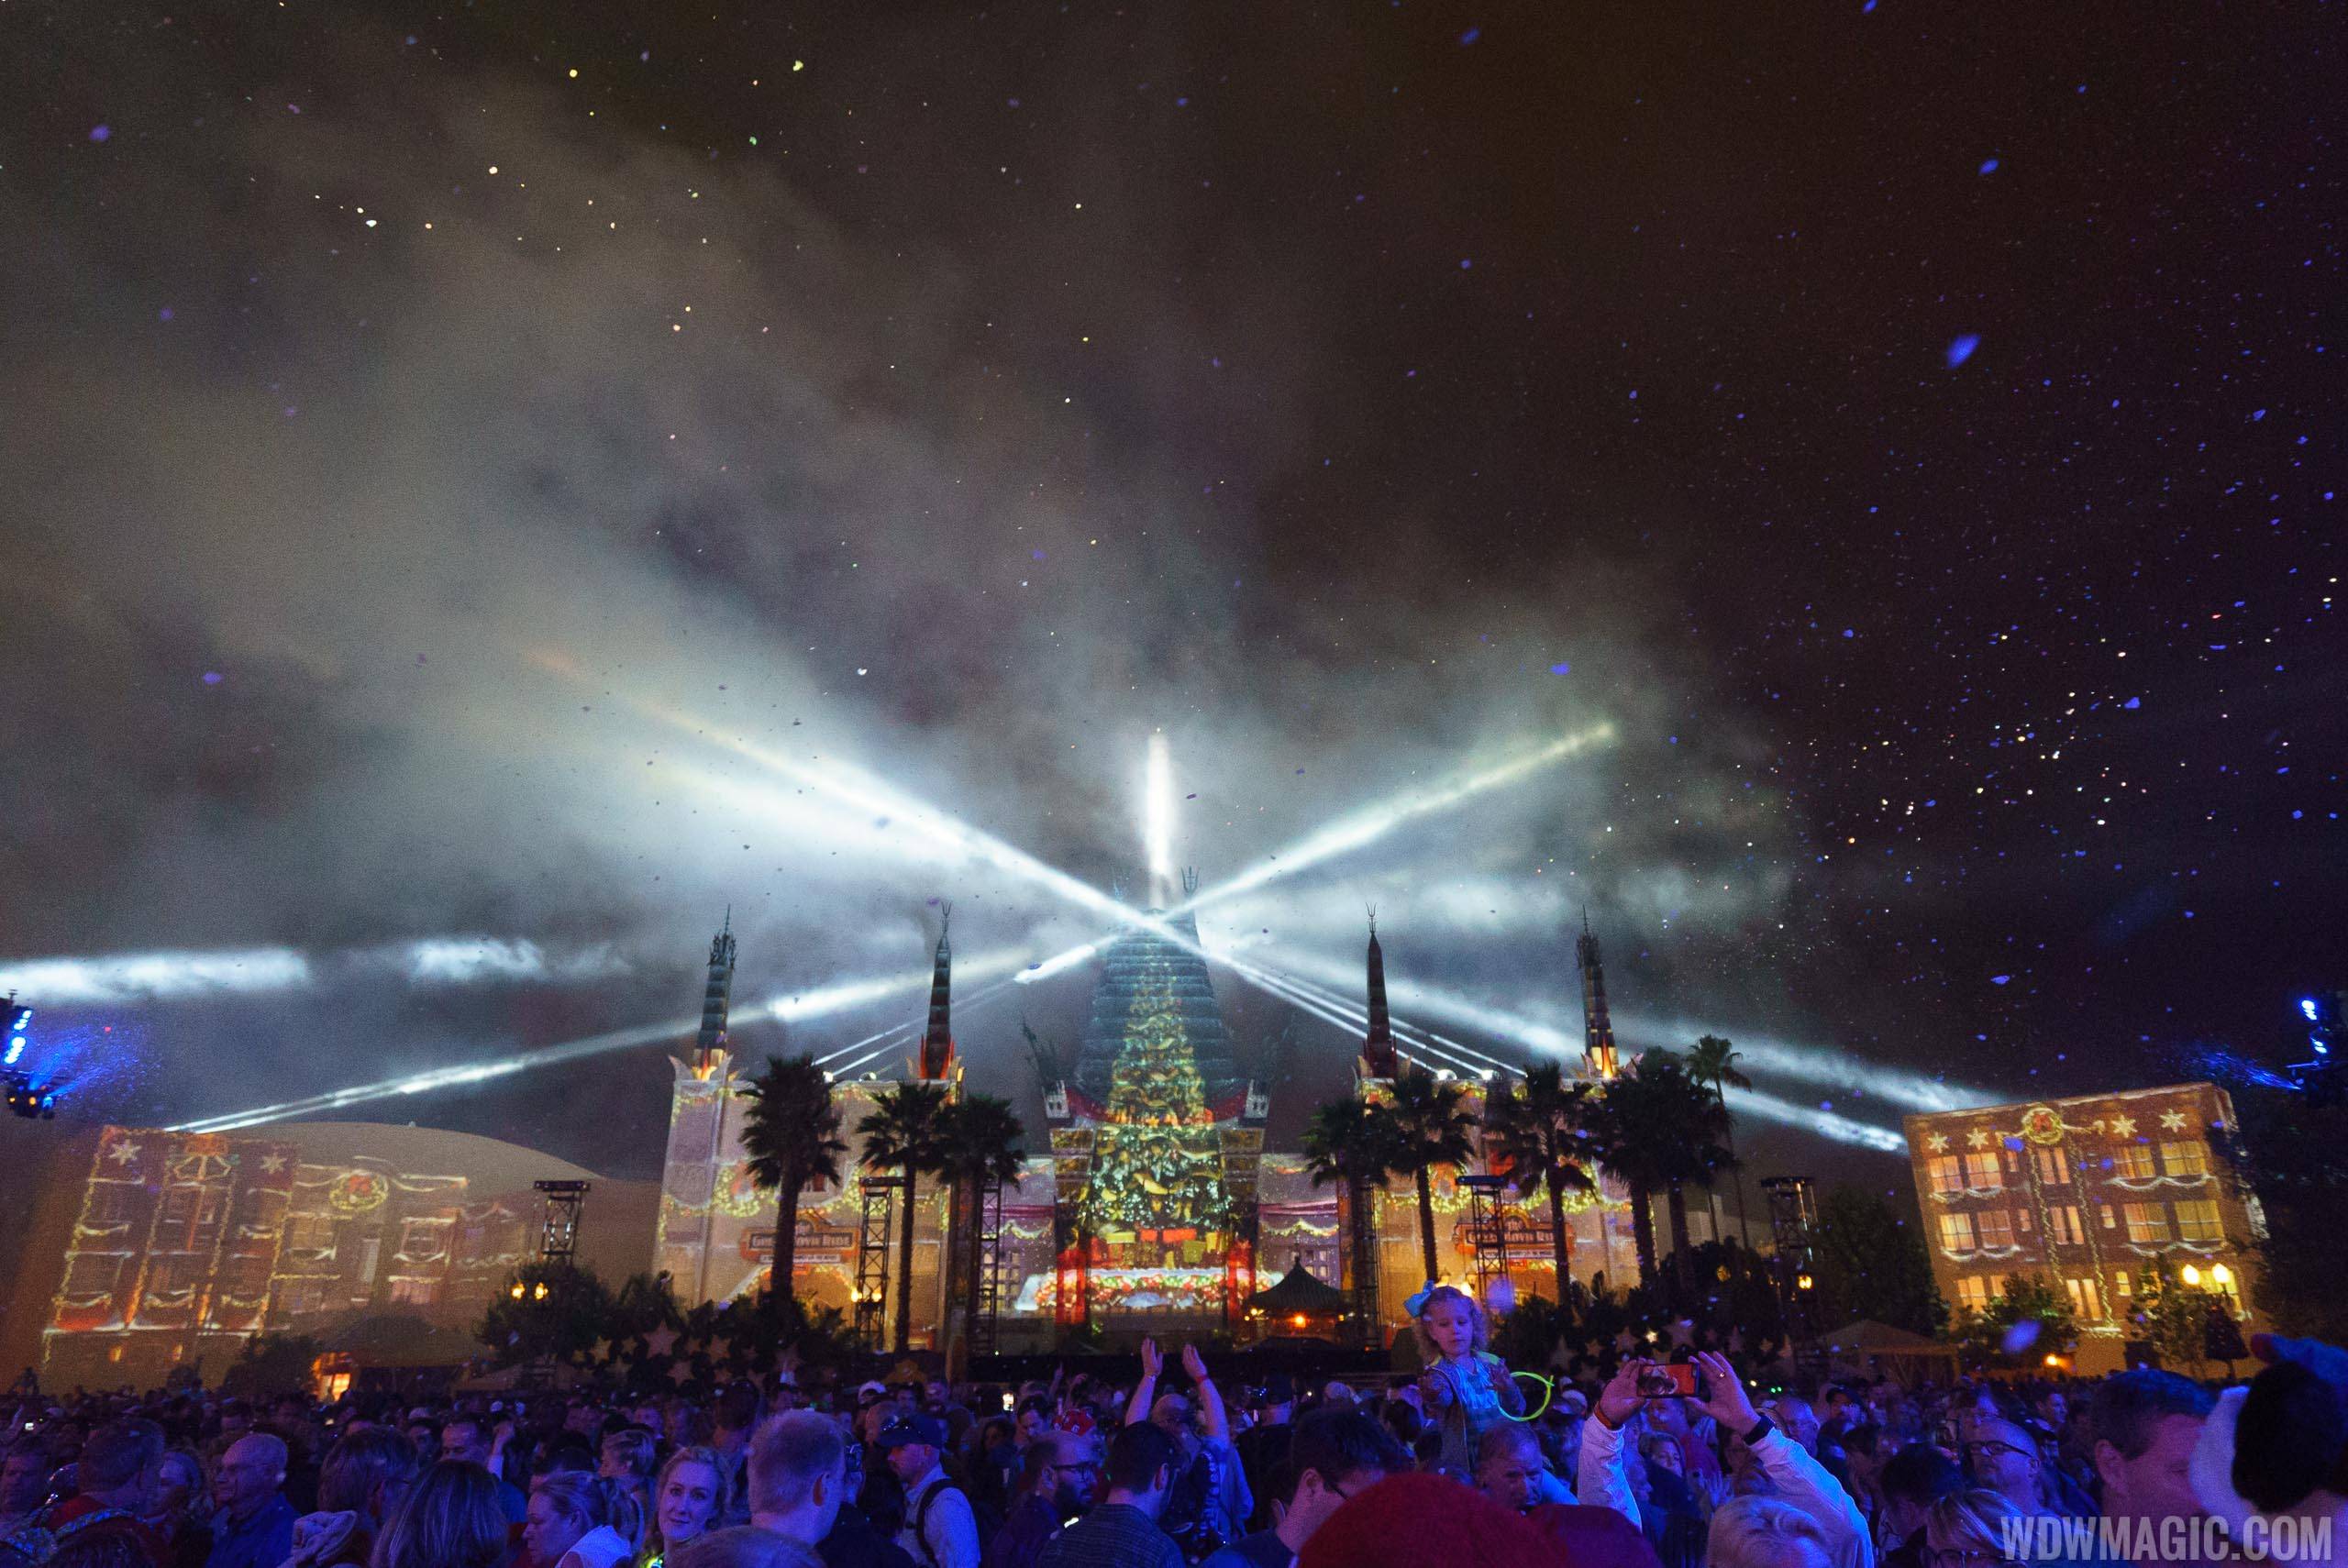 Reservations are now open for the 2019 Jingle Bell, Jingle BAM! Holiday Dessert Party